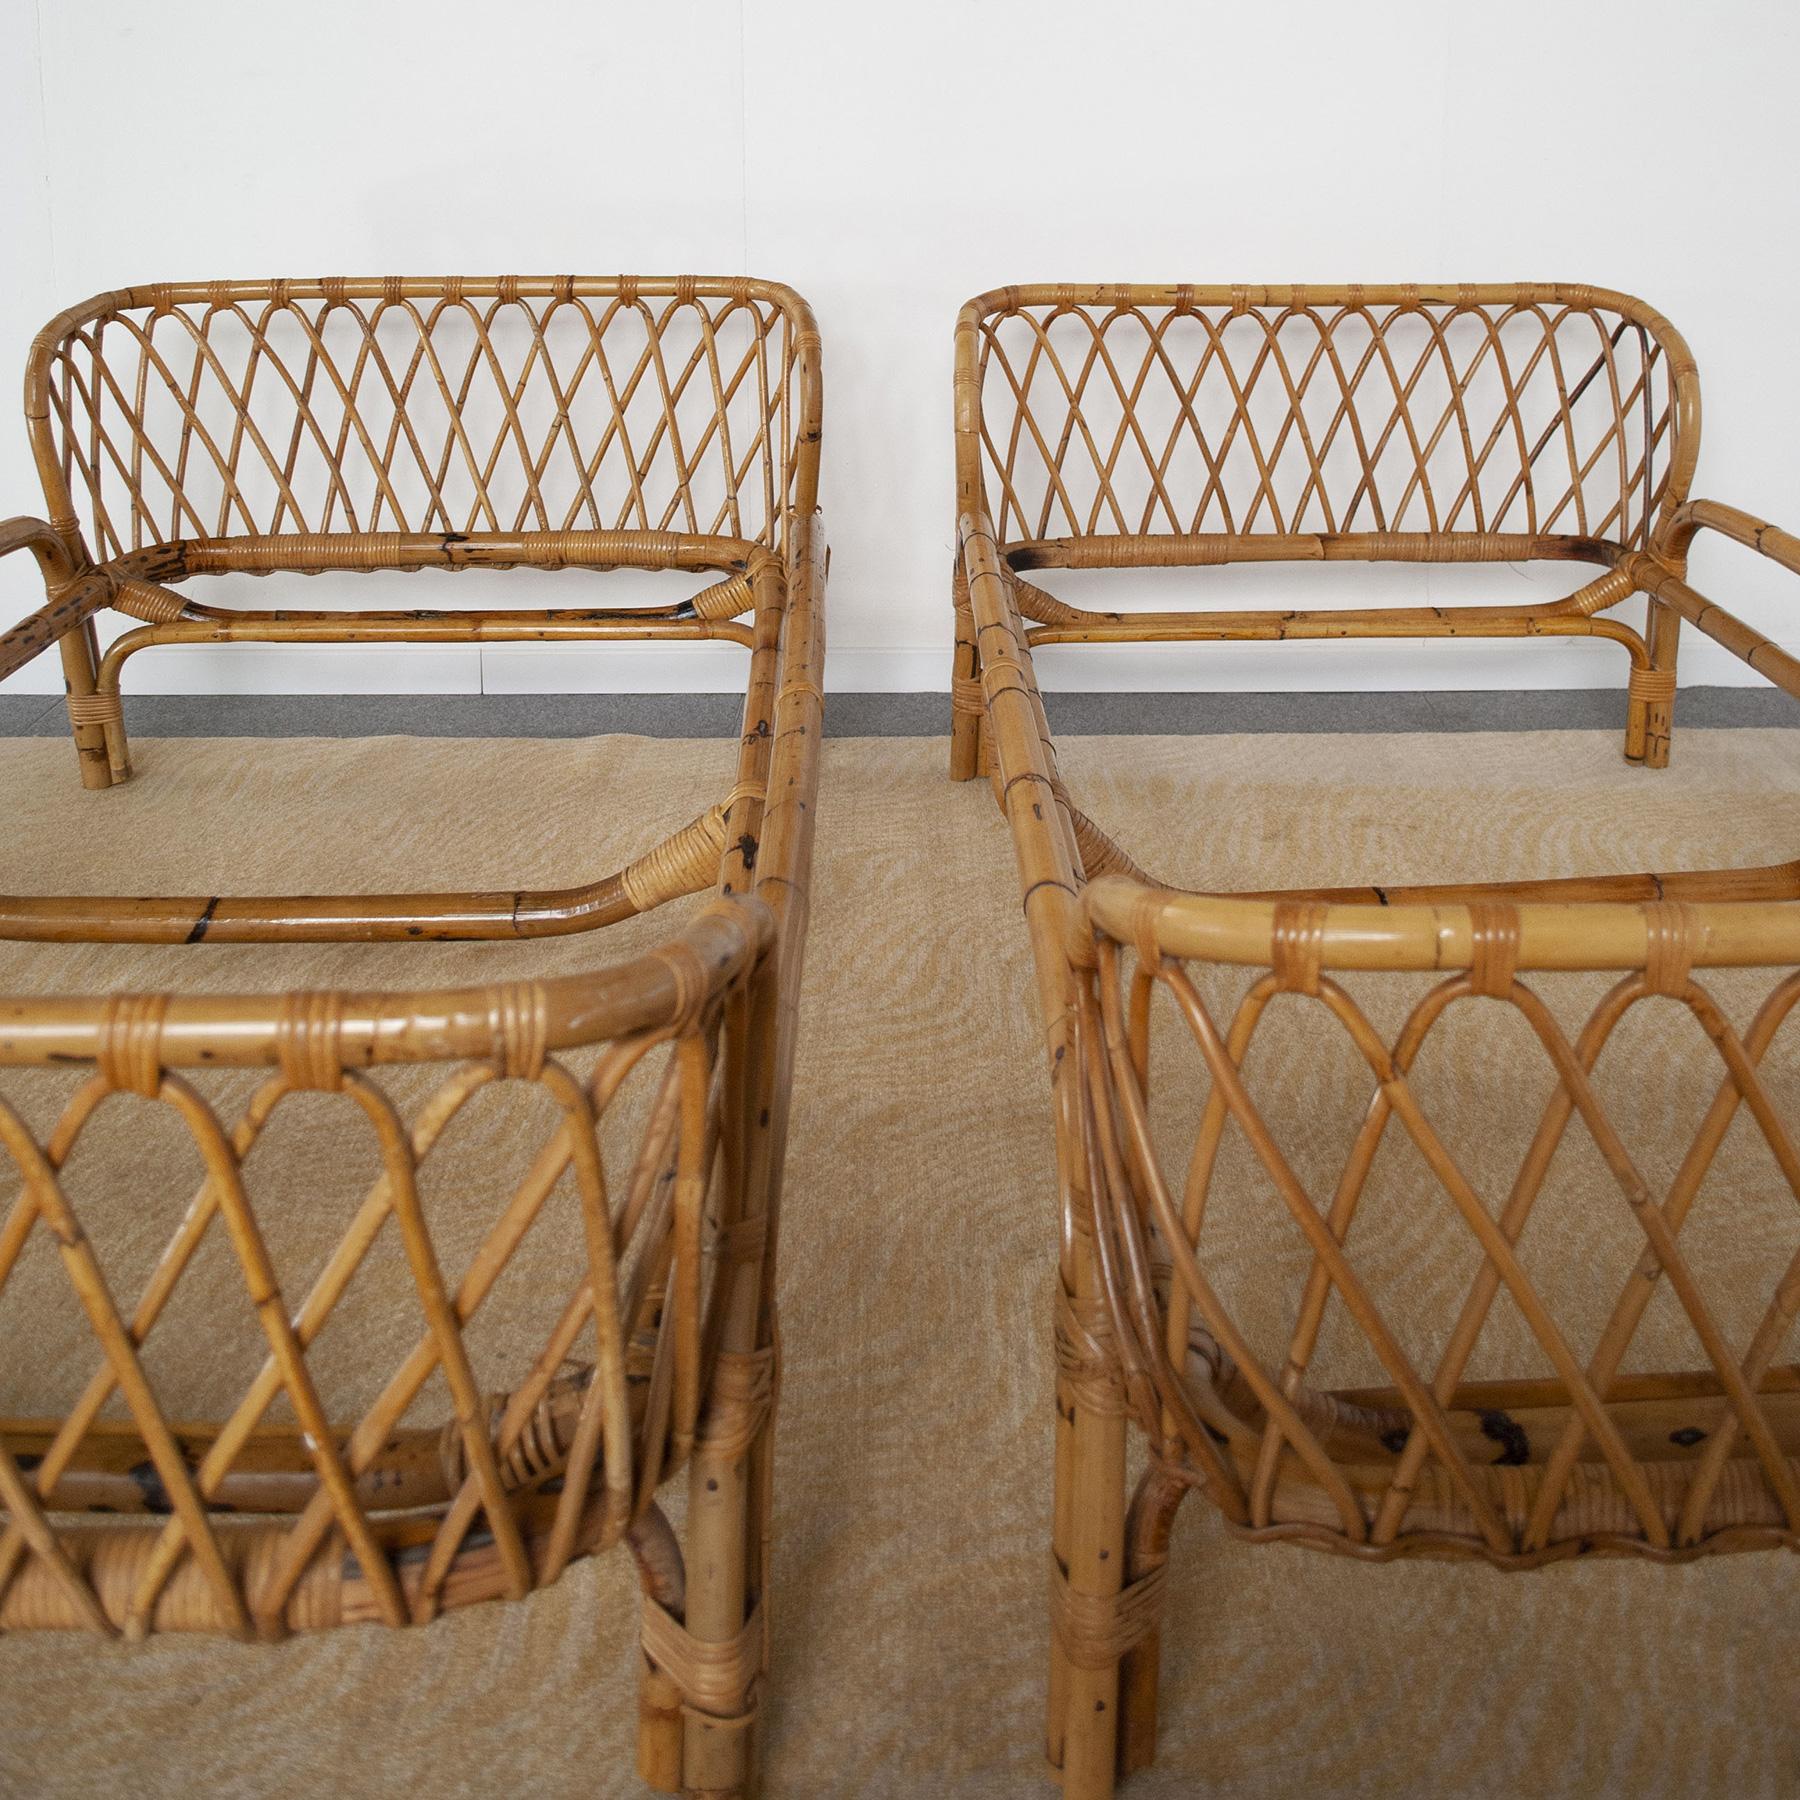 Franca Helg Midcentury Beds Bamboo for Bonacina In Good Condition For Sale In bari, IT